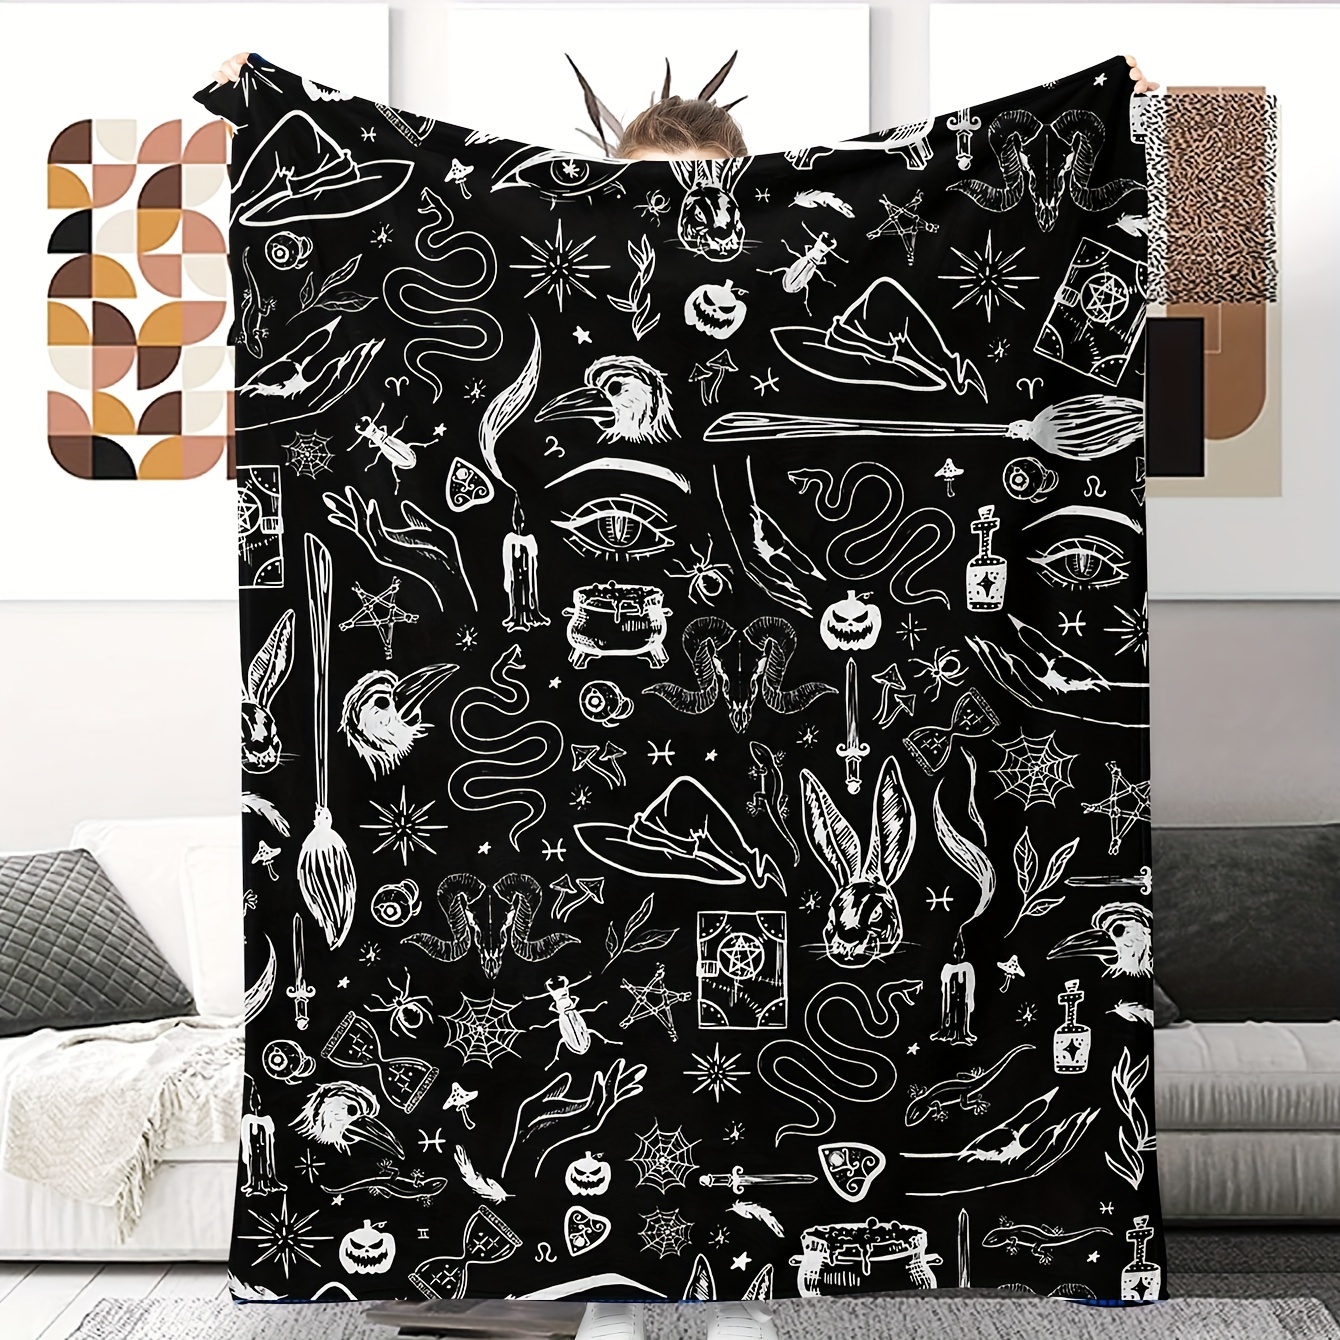 Coffin Shaped Blanket - Enchanted by The Soft Darkness - Goth Decor - Spooky Gifts - Tapestry Blanket - Goth Blanket - Spooky Blanket - Goth Gifts